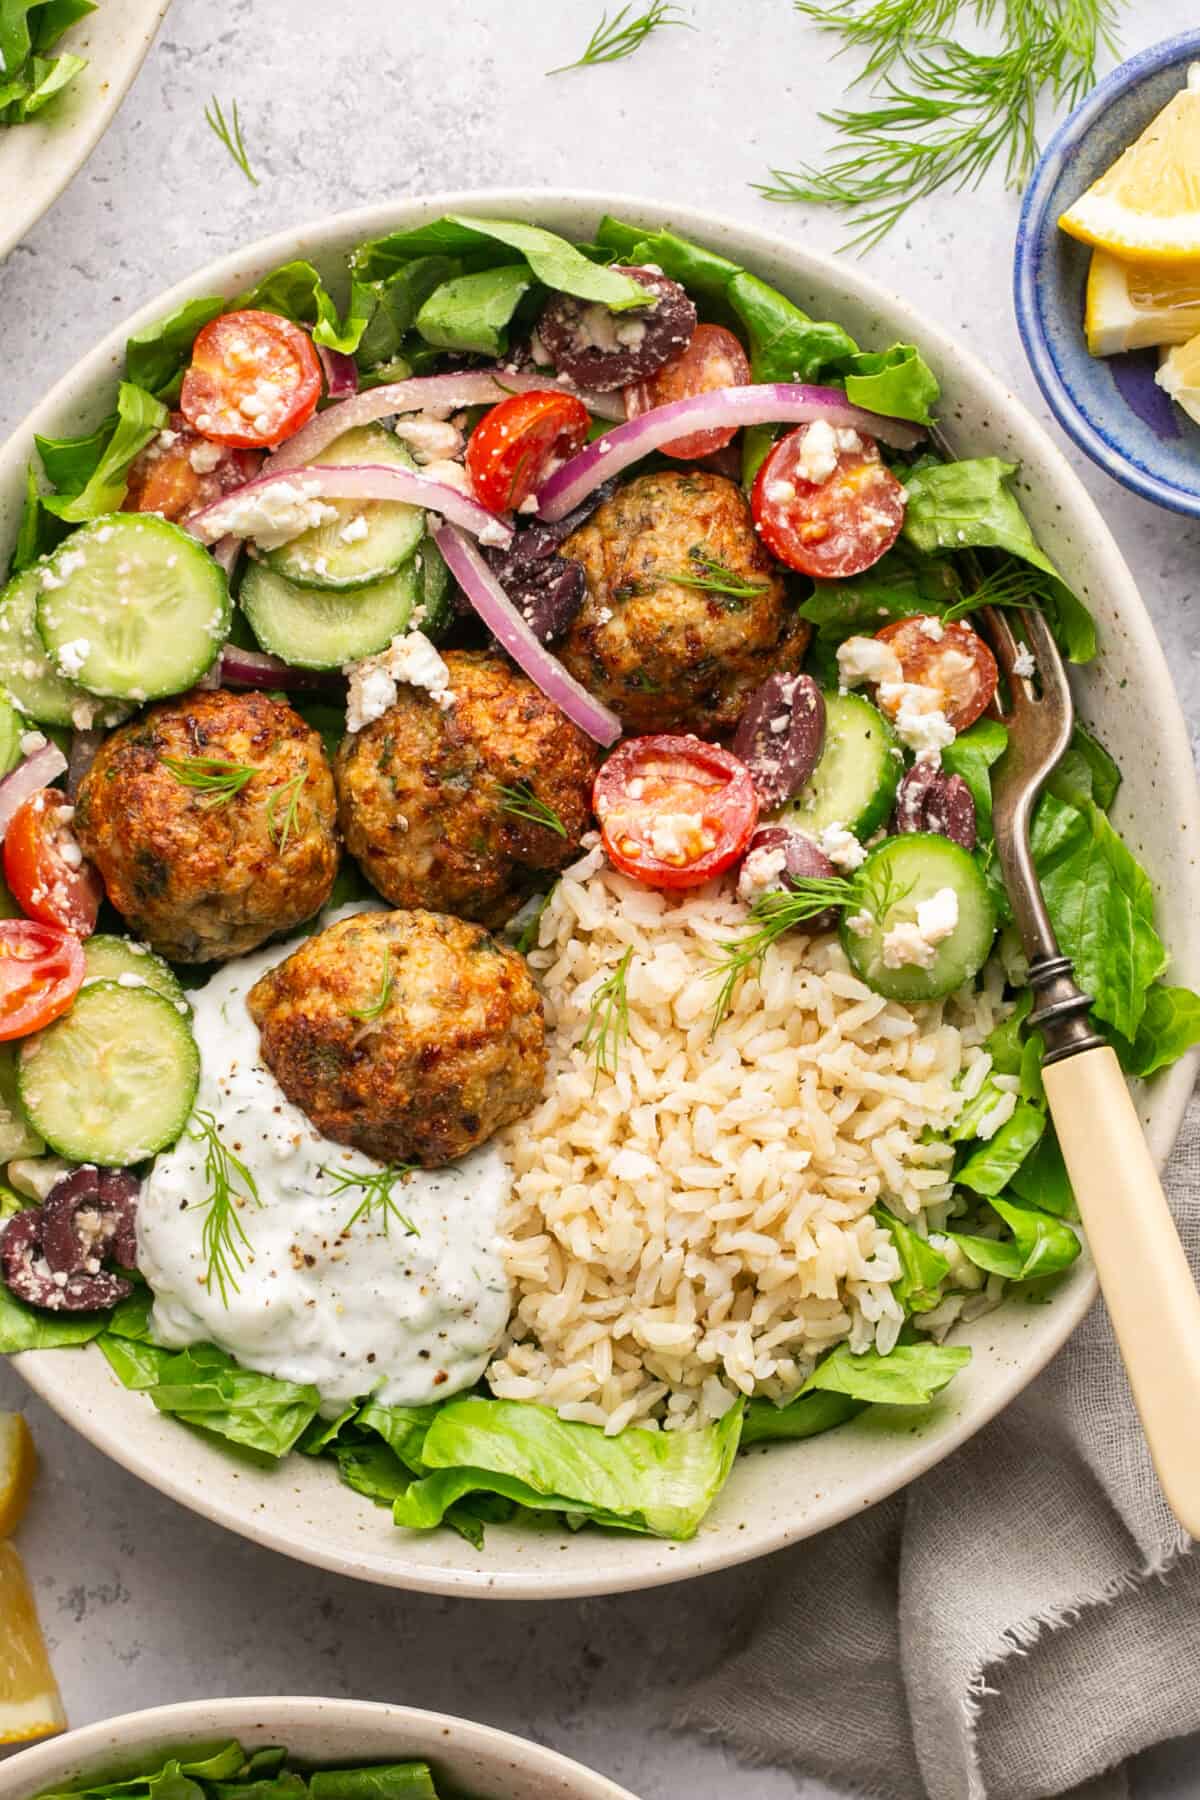 Bed of lettuce topped with brown rice, greek salad mixture, homemade tzatziki and meatballs.